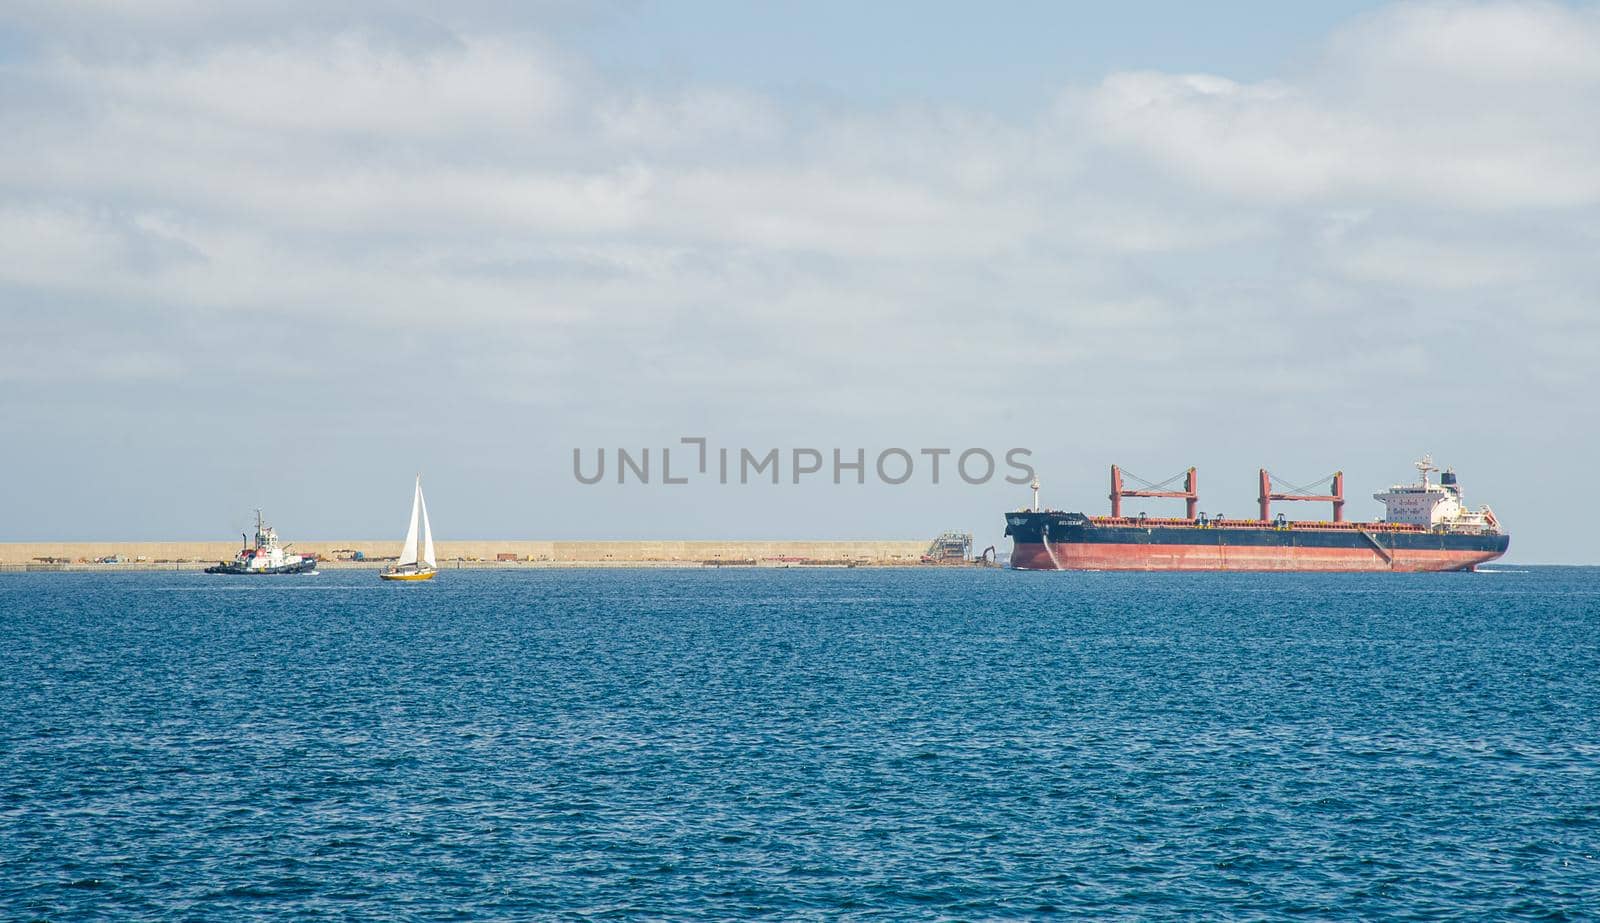 Picture of Las palmas Canary Island port with large ships carrying cargo, large container cranes and passenger ships